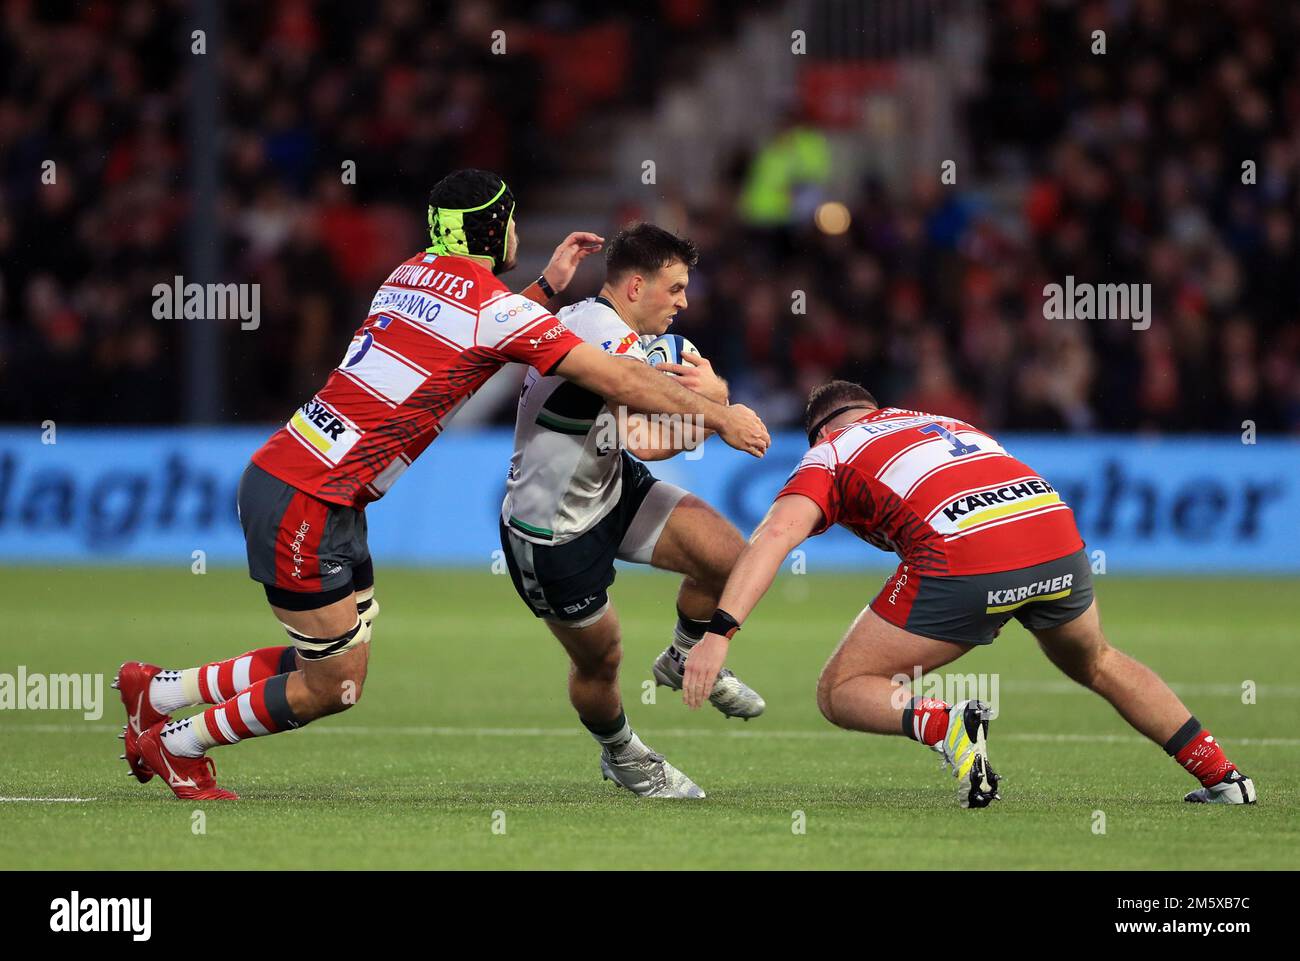 London Irish's Ben White tackled by Gloucester Rugby's Matias Alemanno and Harry Elrington during the Gallagher Premiership match at Kingsholm Stadium, Gloucester. Picture date: Saturday December 31, 2022. Stock Photo